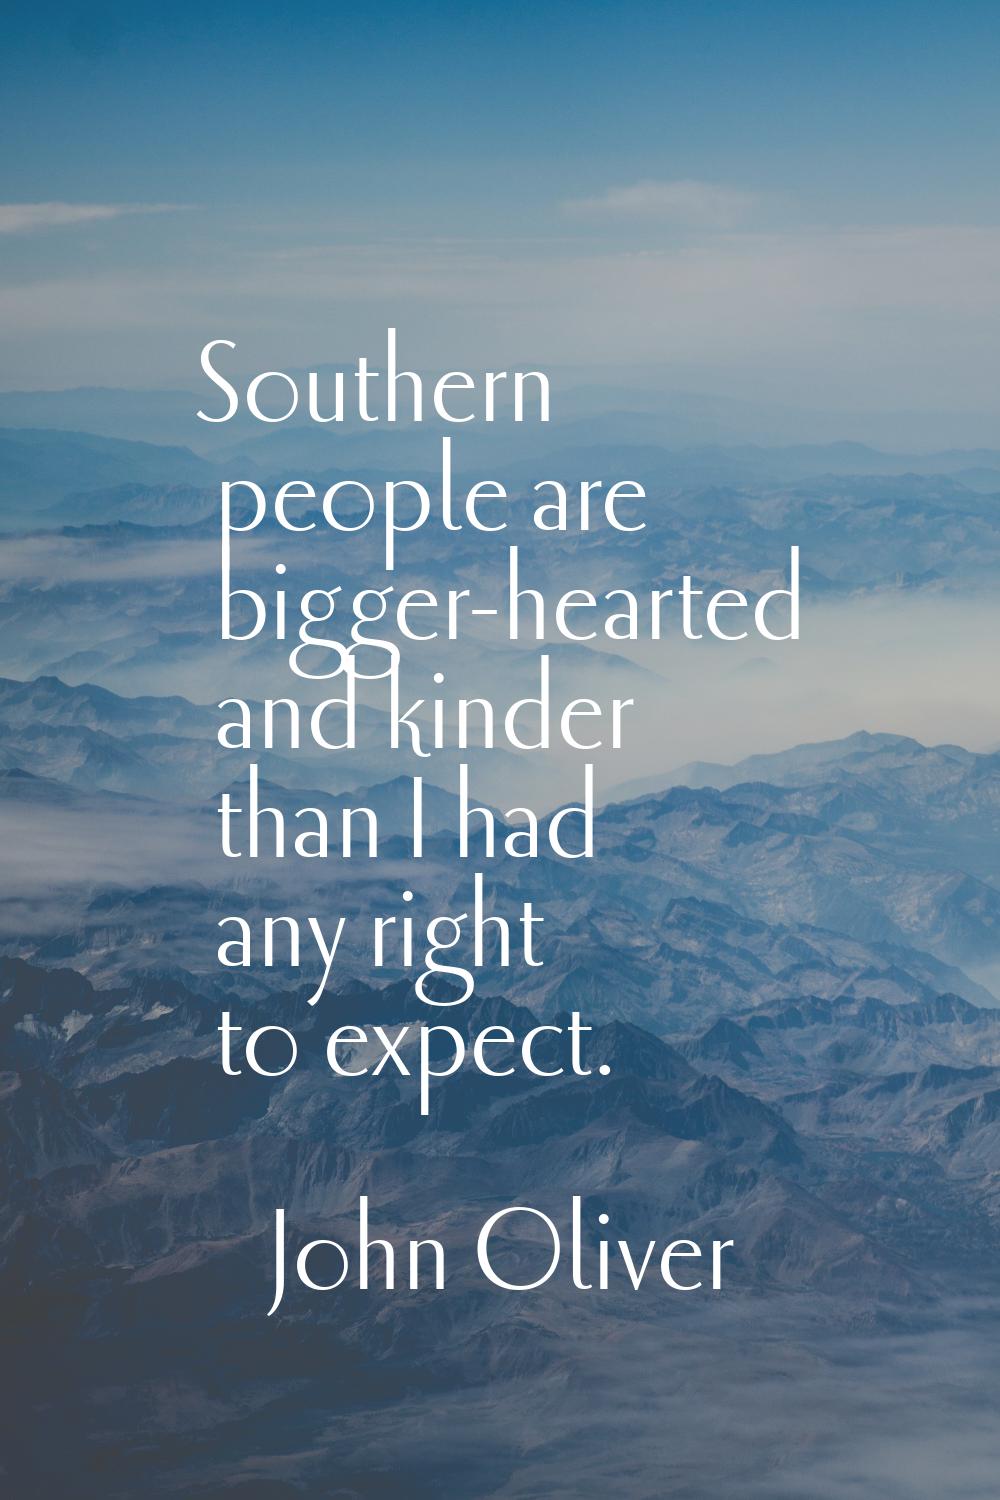 Southern people are bigger-hearted and kinder than I had any right to expect.